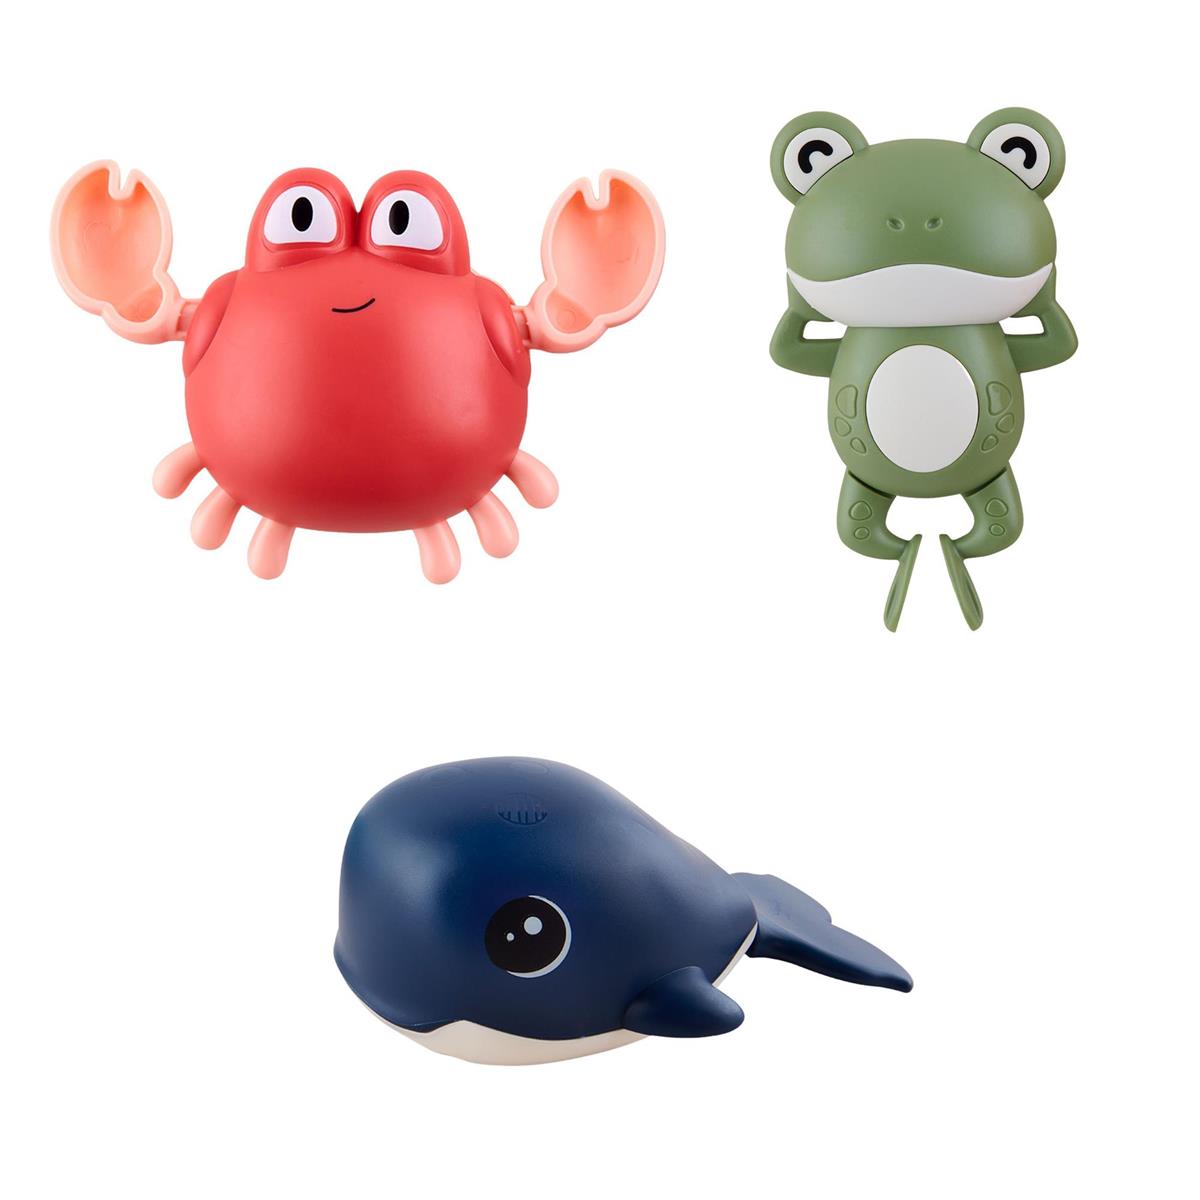 all three animal bath swimmers on a white background